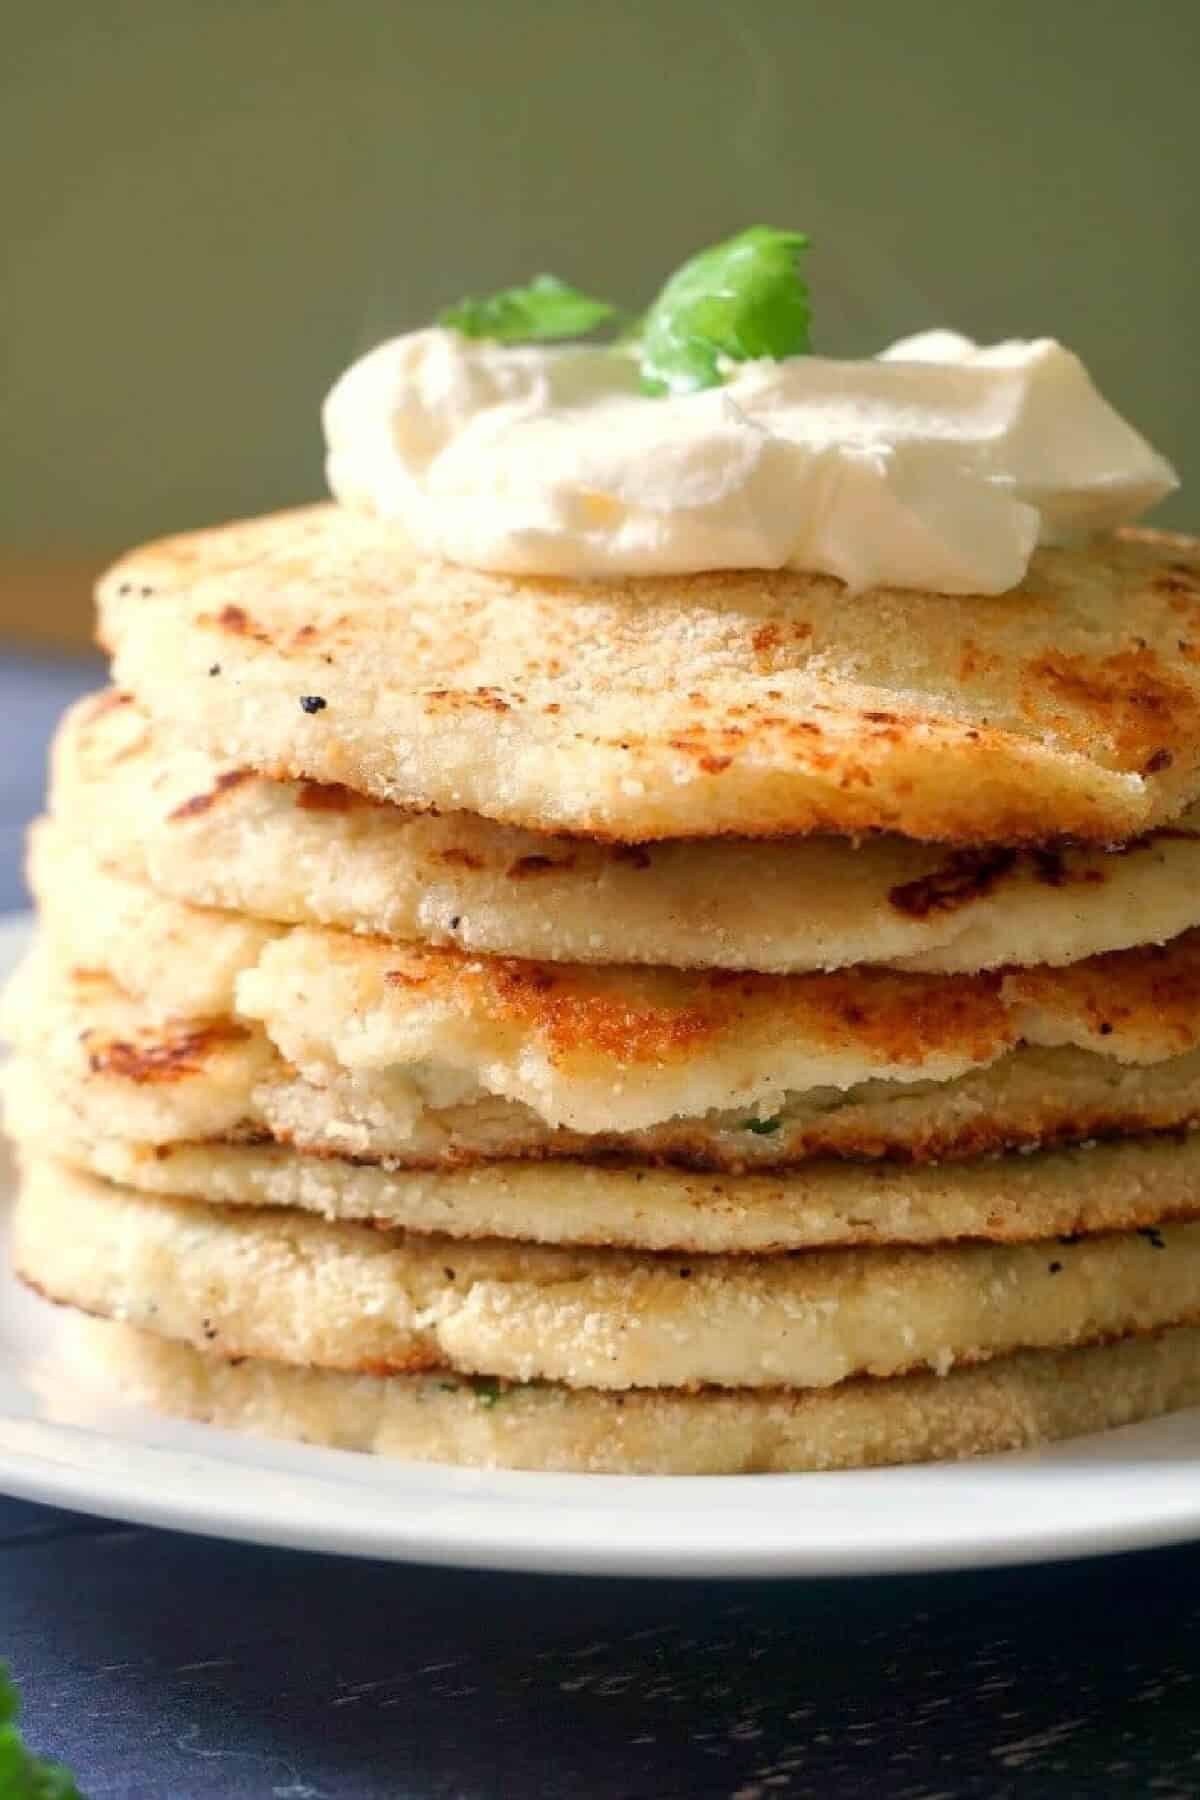 A pile of potato pancakes topped with a dollop of yogurt.